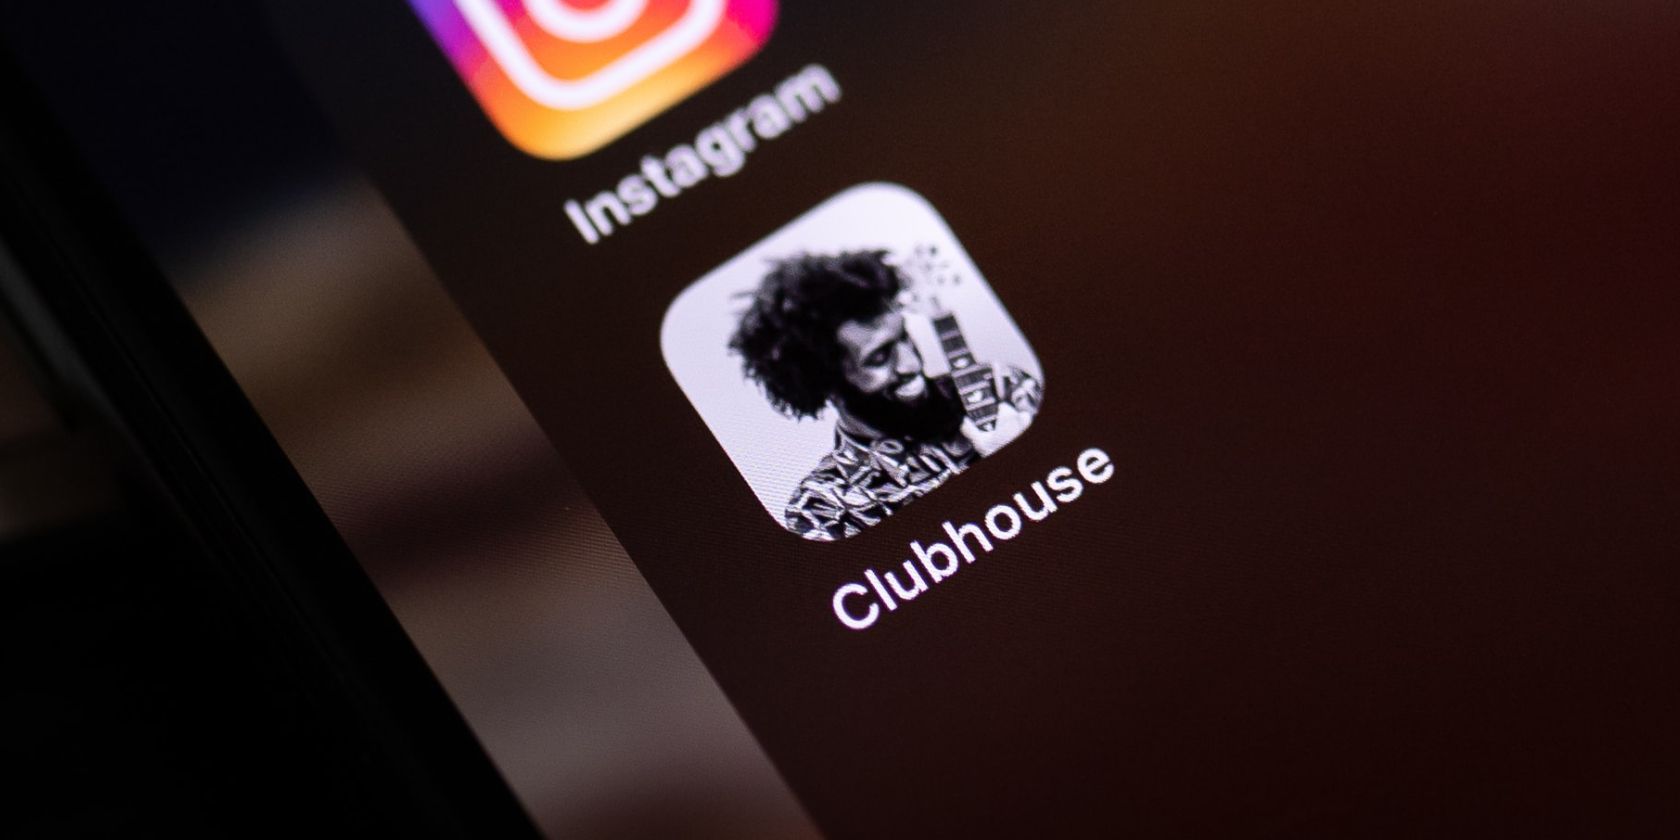 A close-up of the Clubhouse app on a phone